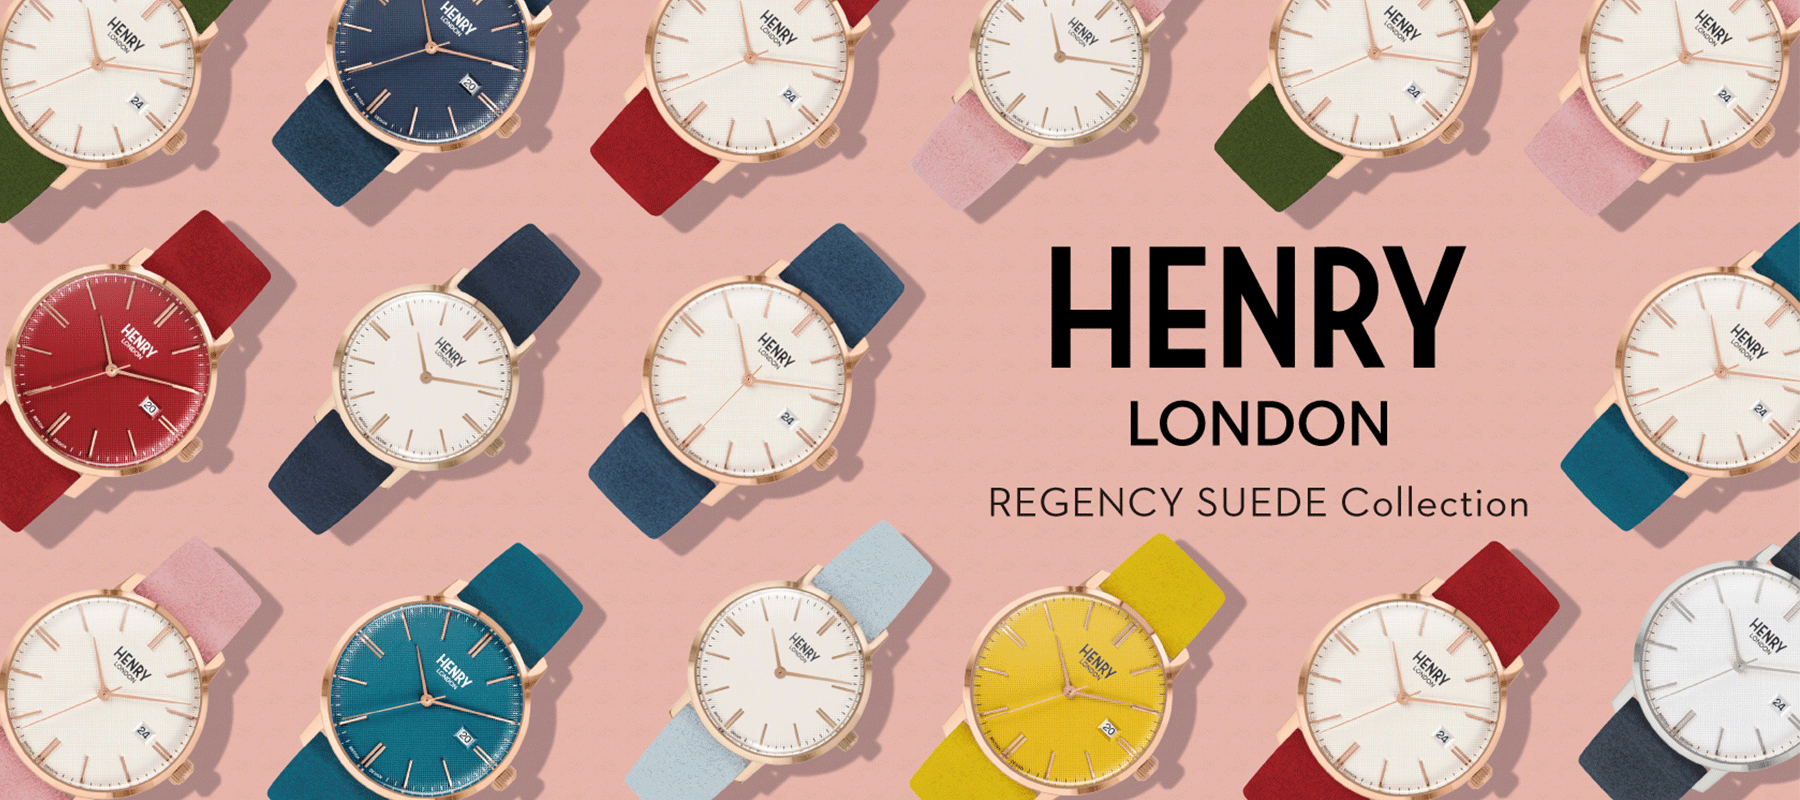 HENRY LONDON　「REGENCY SUEDE Collection」